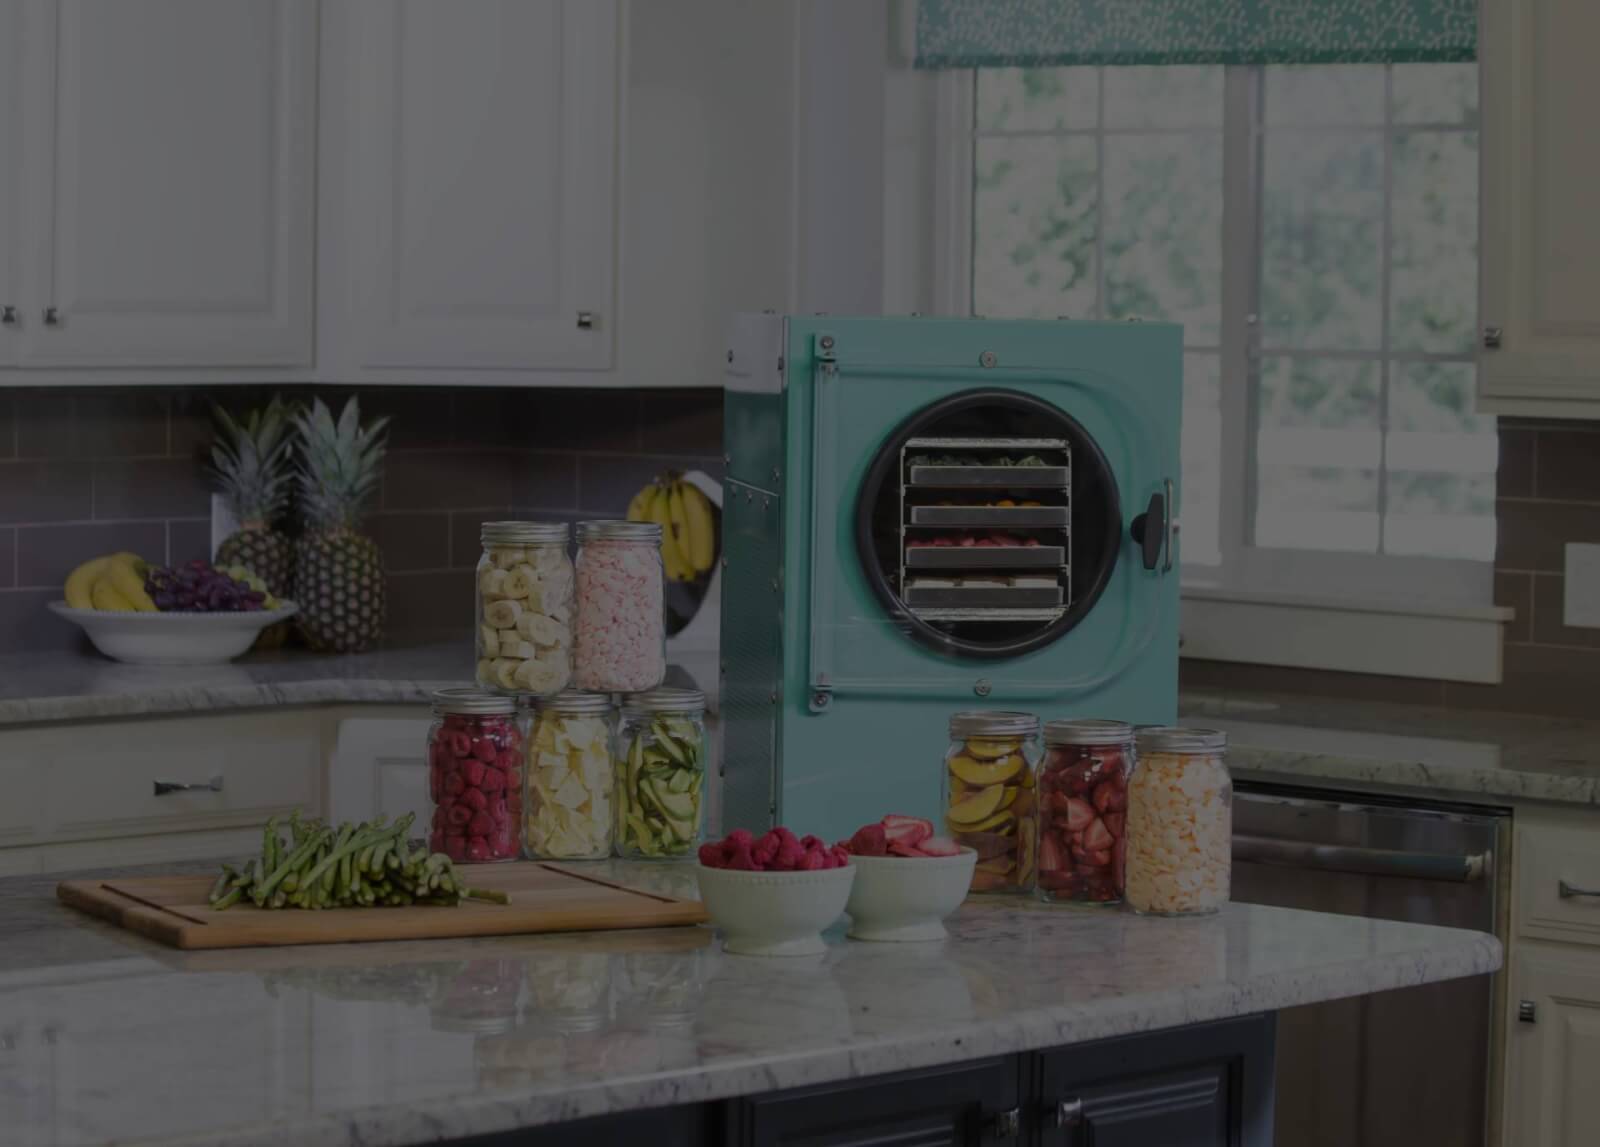 Home Dehydrator Vs. Home Freeze Dryer: Which is best for you?